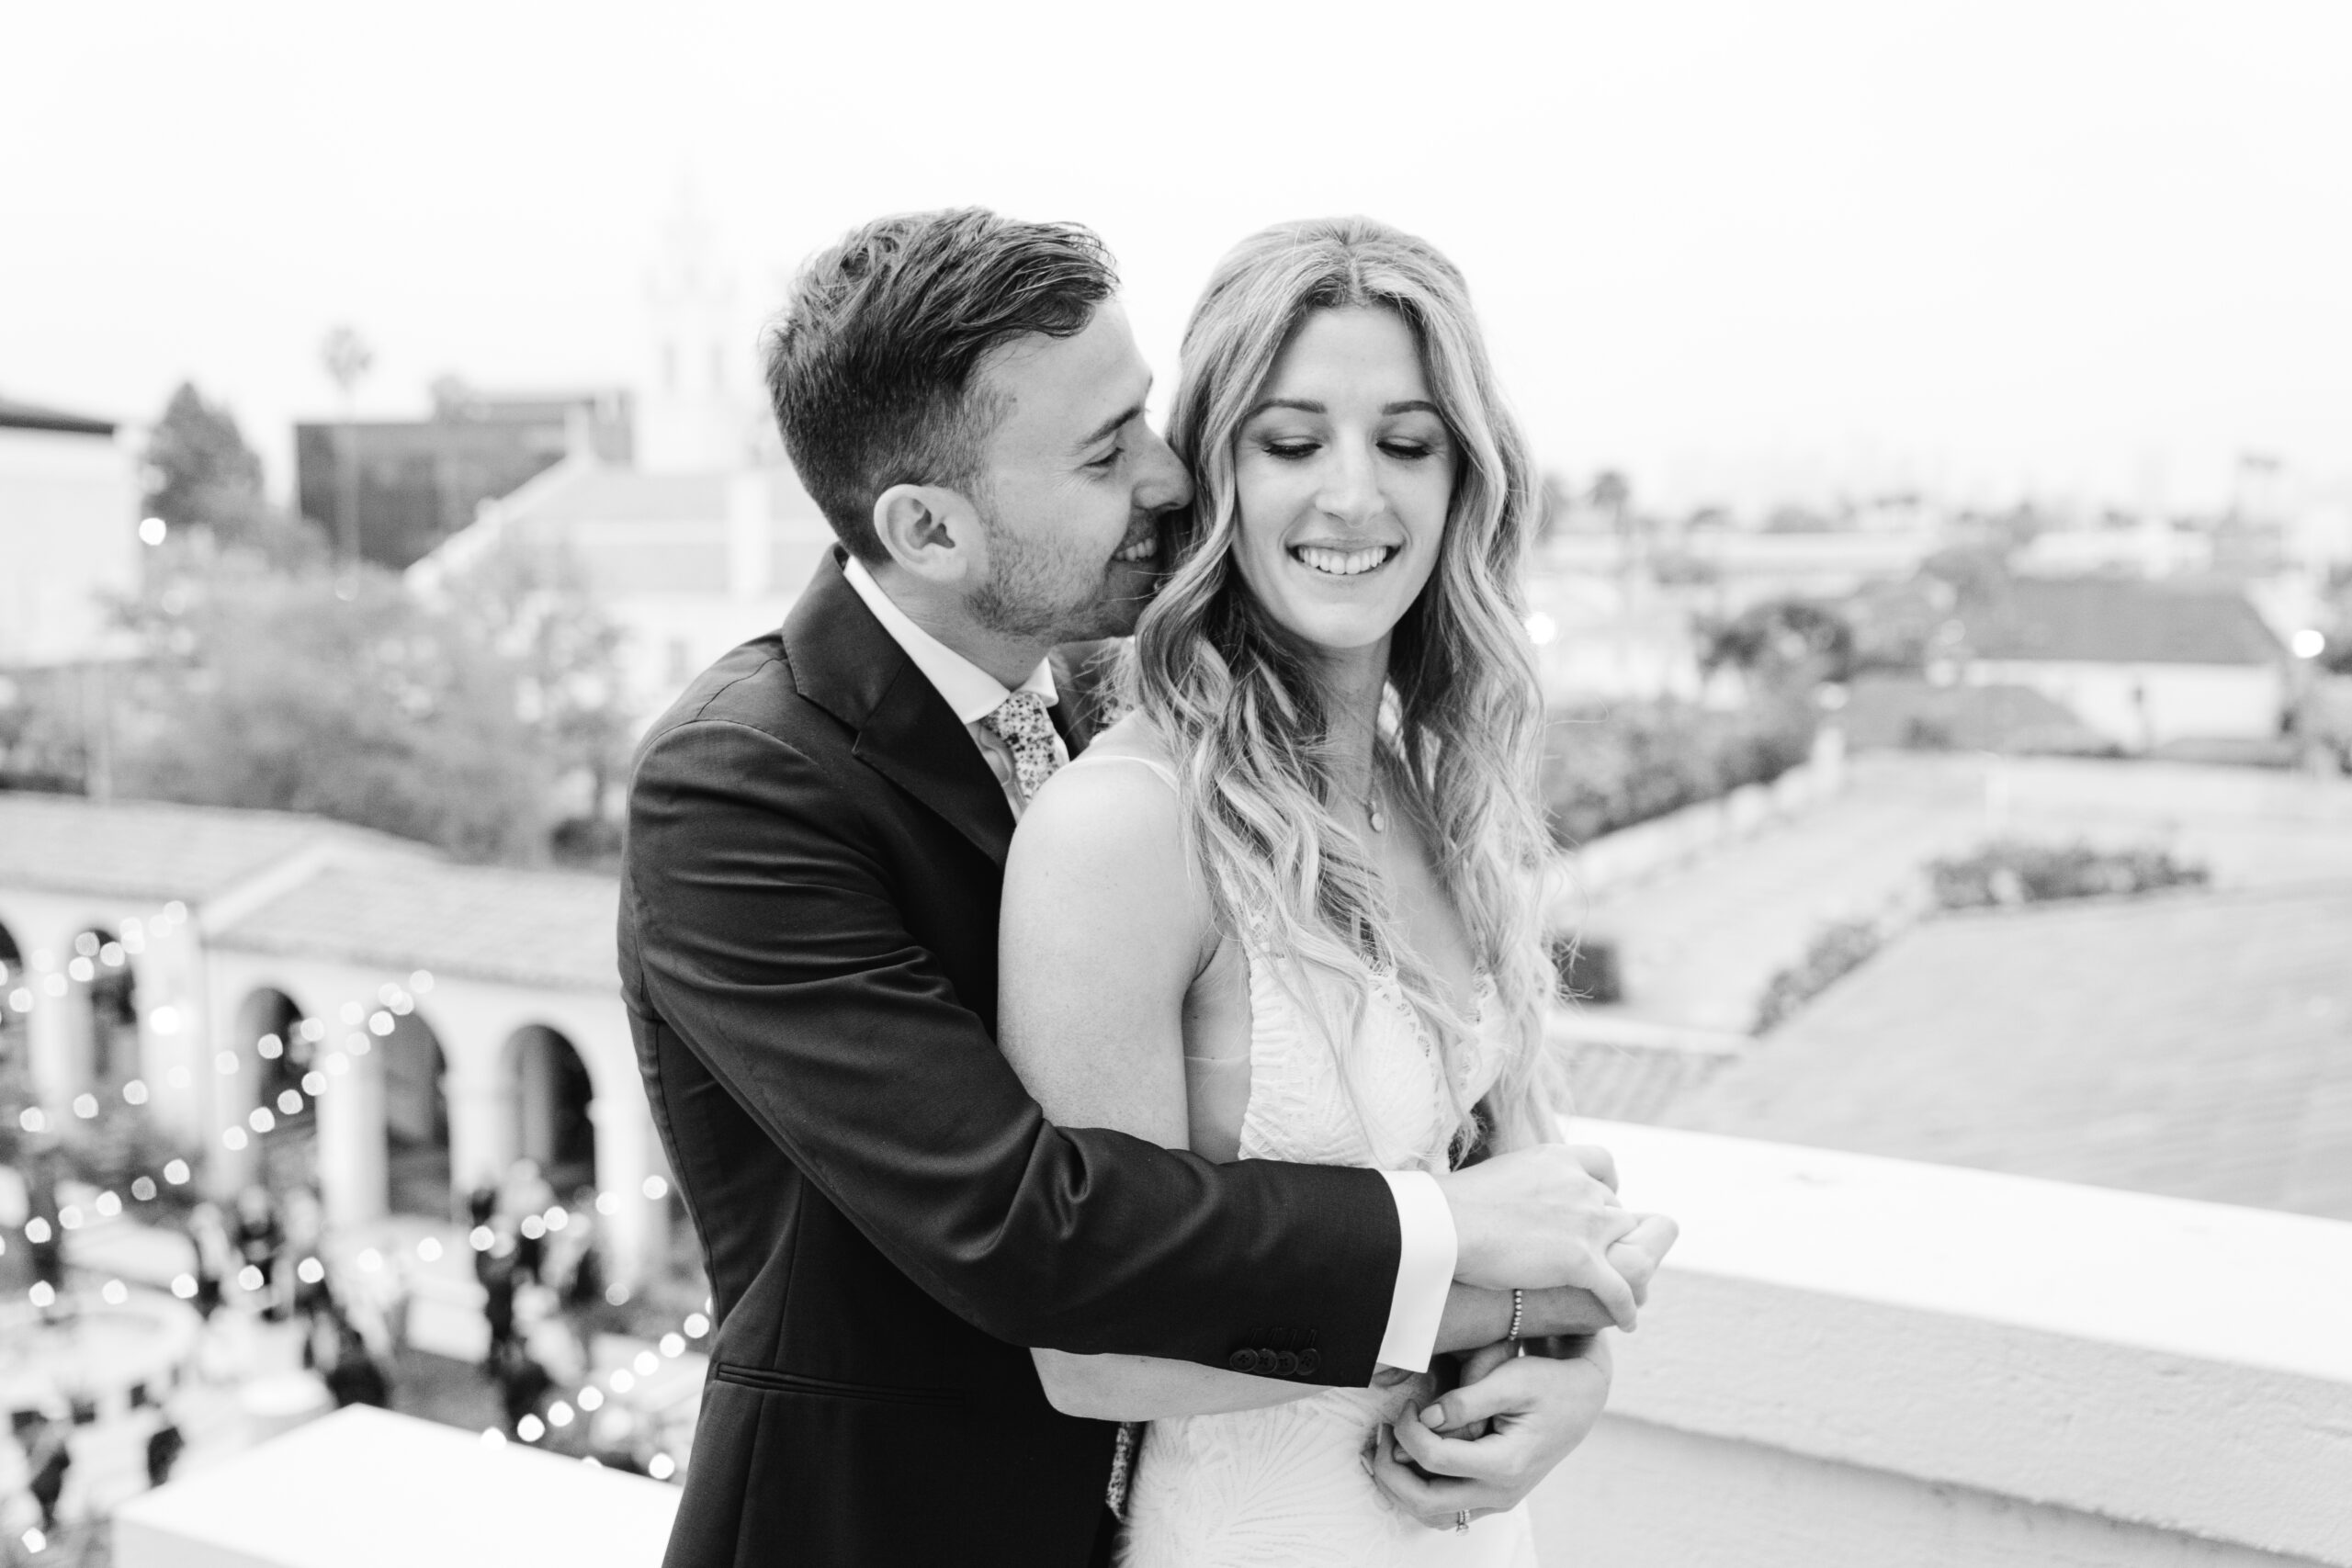 A black and white of the groom embracing his bride. Behind them is the Ebell Los Angeles where their Jewish wedding takes place.